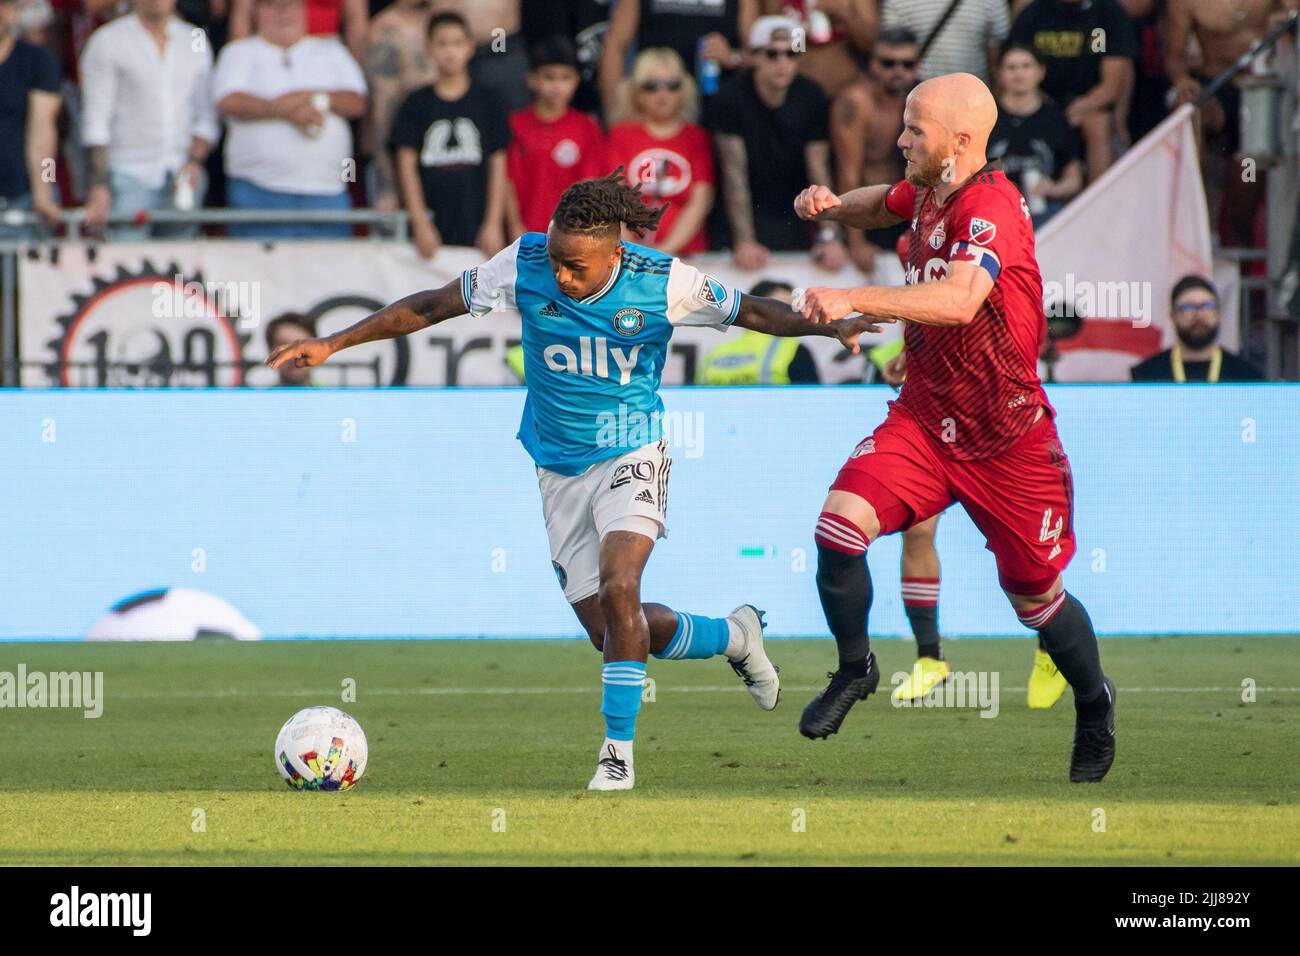 Yordy Reyna (26) and Michael Bradley (4) in action during the MLS game between Toronto FC and Charlotte FC at BMO field in Toronto. The game ended 4-0 for Toronto FC. (Photo by Angel Marchini / SOPA Images/Sipa USA) Stock Photo